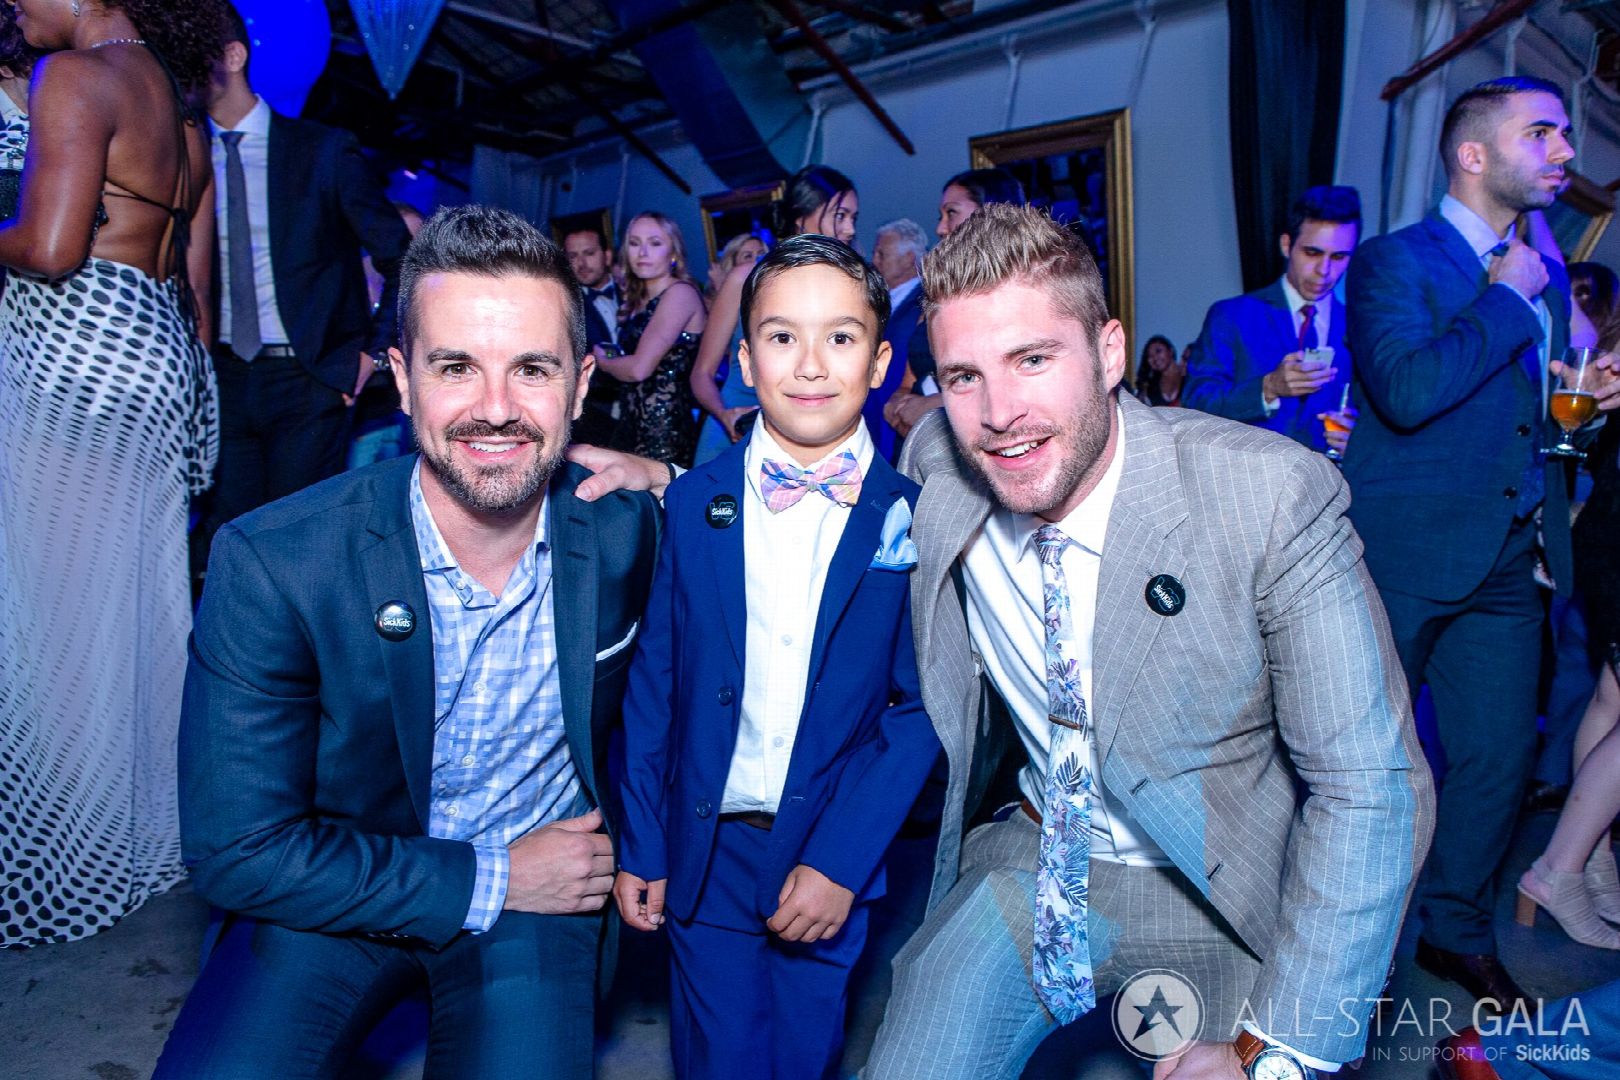 Read more about the article Sick Kids All Star Gala